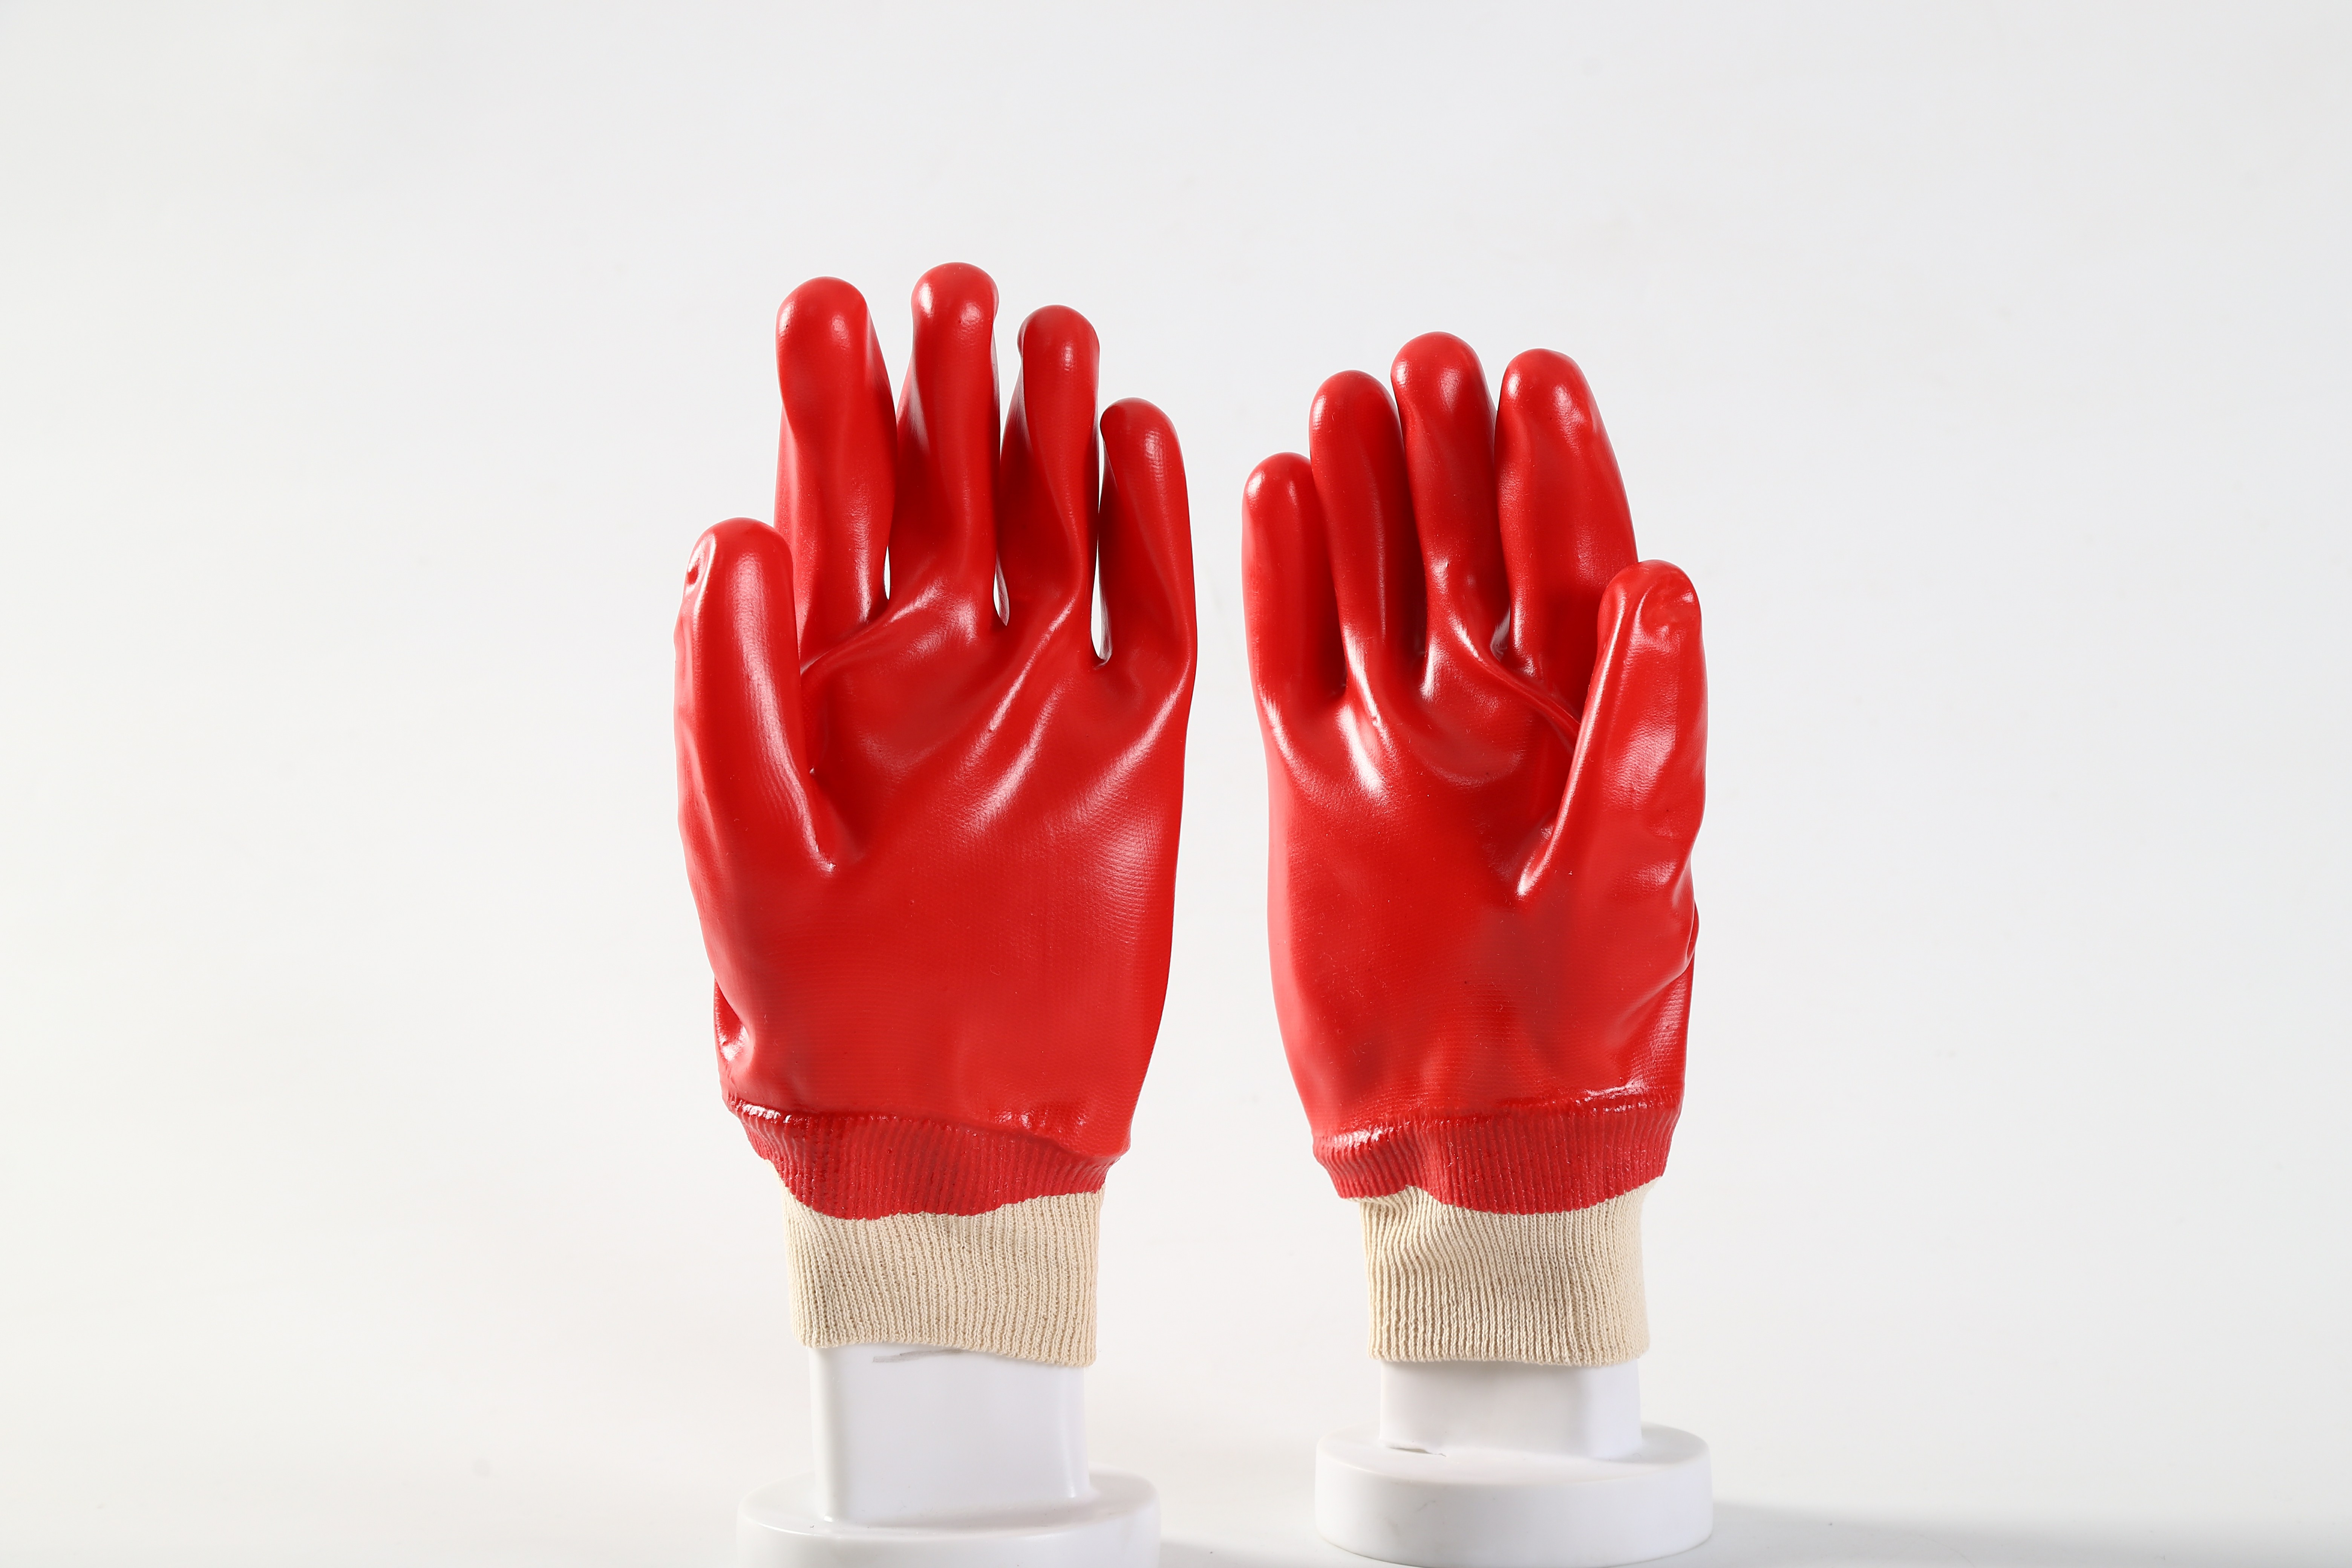 Best Selling PVC Coated Gloves Liquid Proof Anti Silp Strong Grip Work Gloves For Sale Acid and alkali resistant